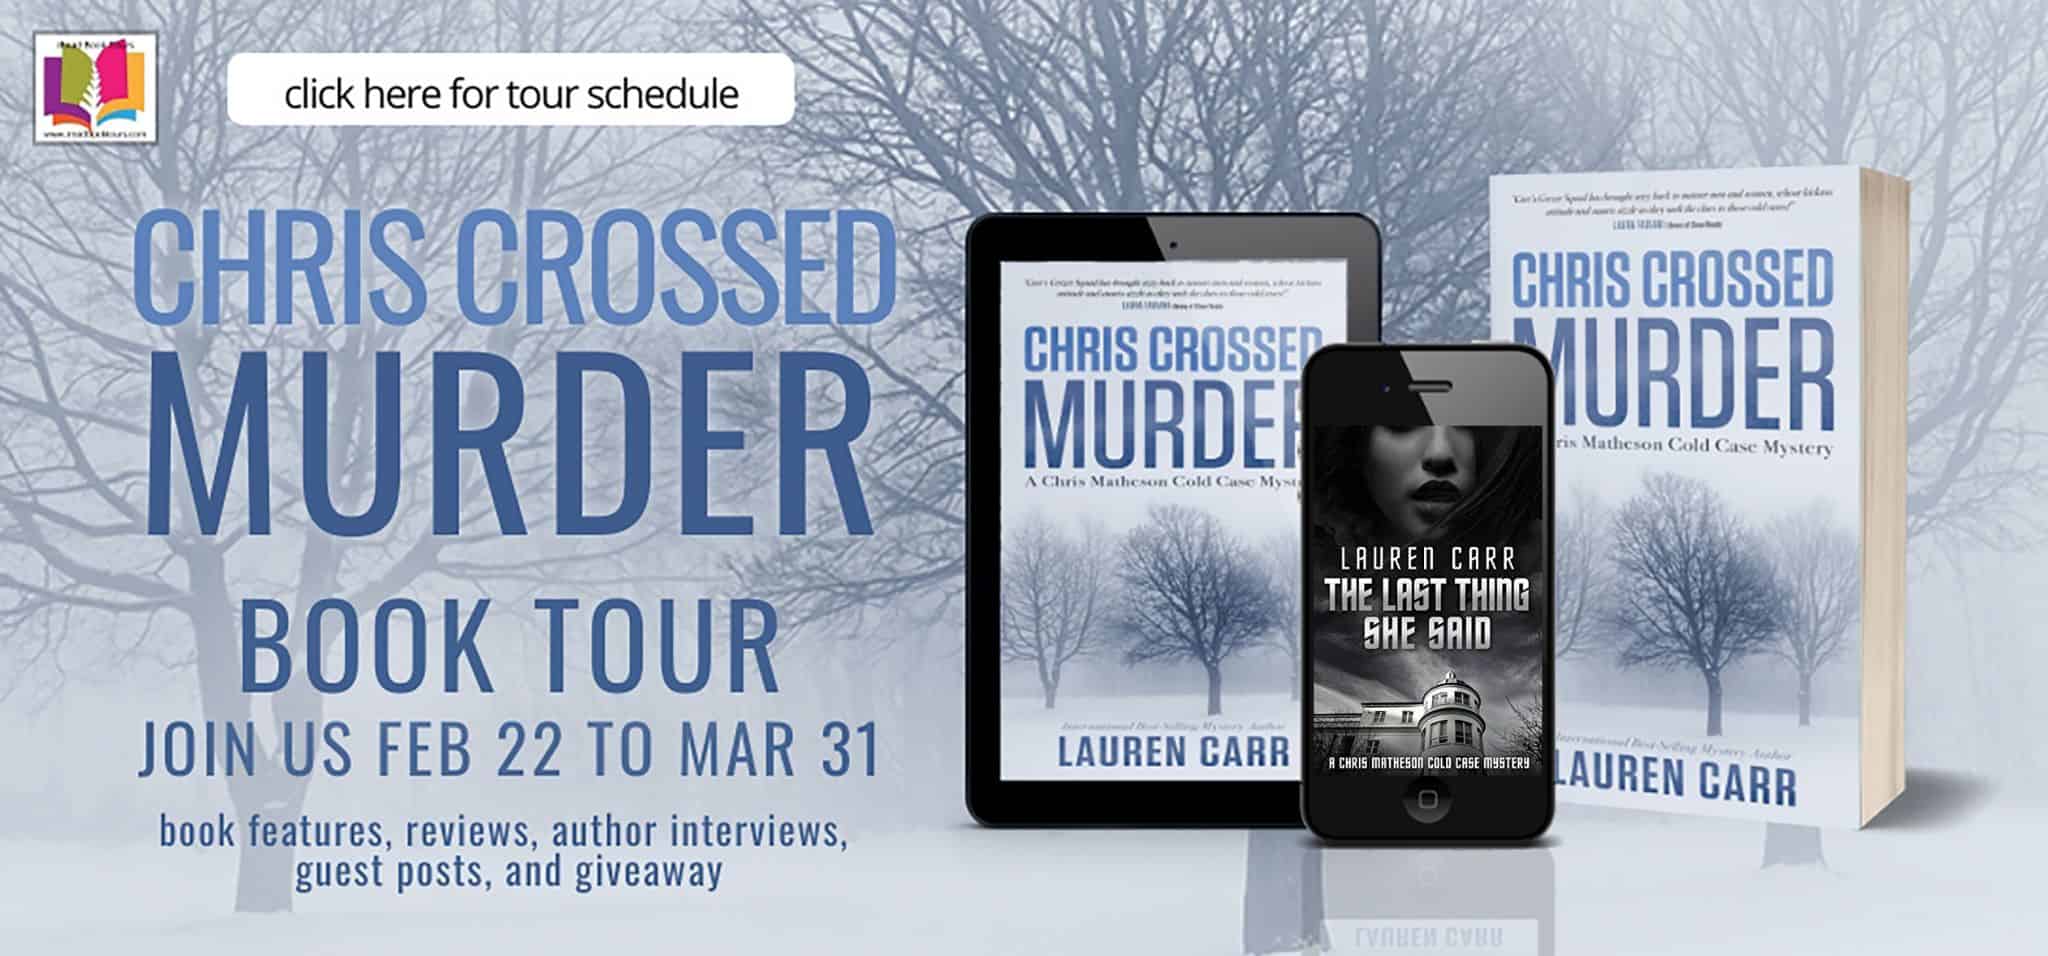 The Last Thing She Said (A Chris Matheson Cold Case Mystery, #3) by Lauren Carr | Book Review ~ Giveaway 